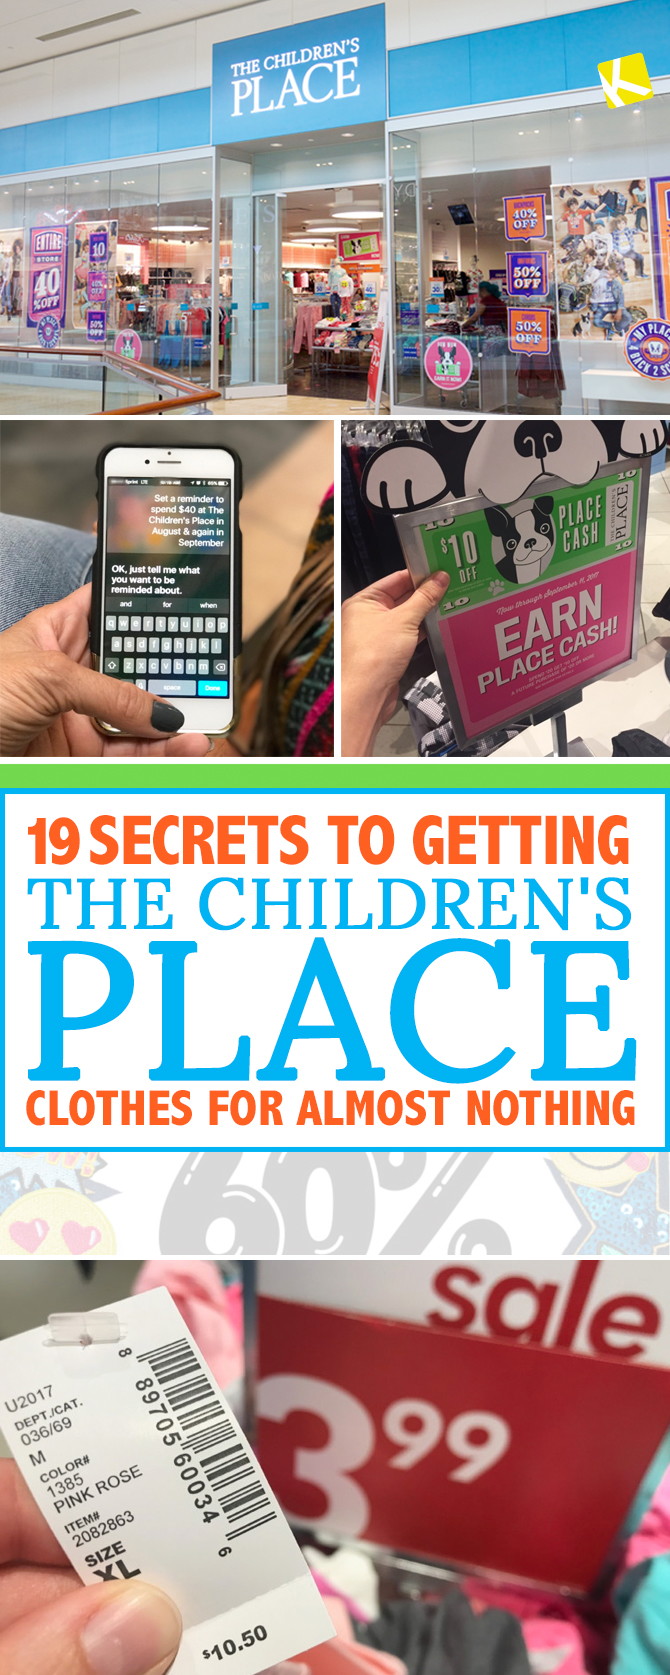 19 Secrets to Getting The Children's Place Clothes for ...